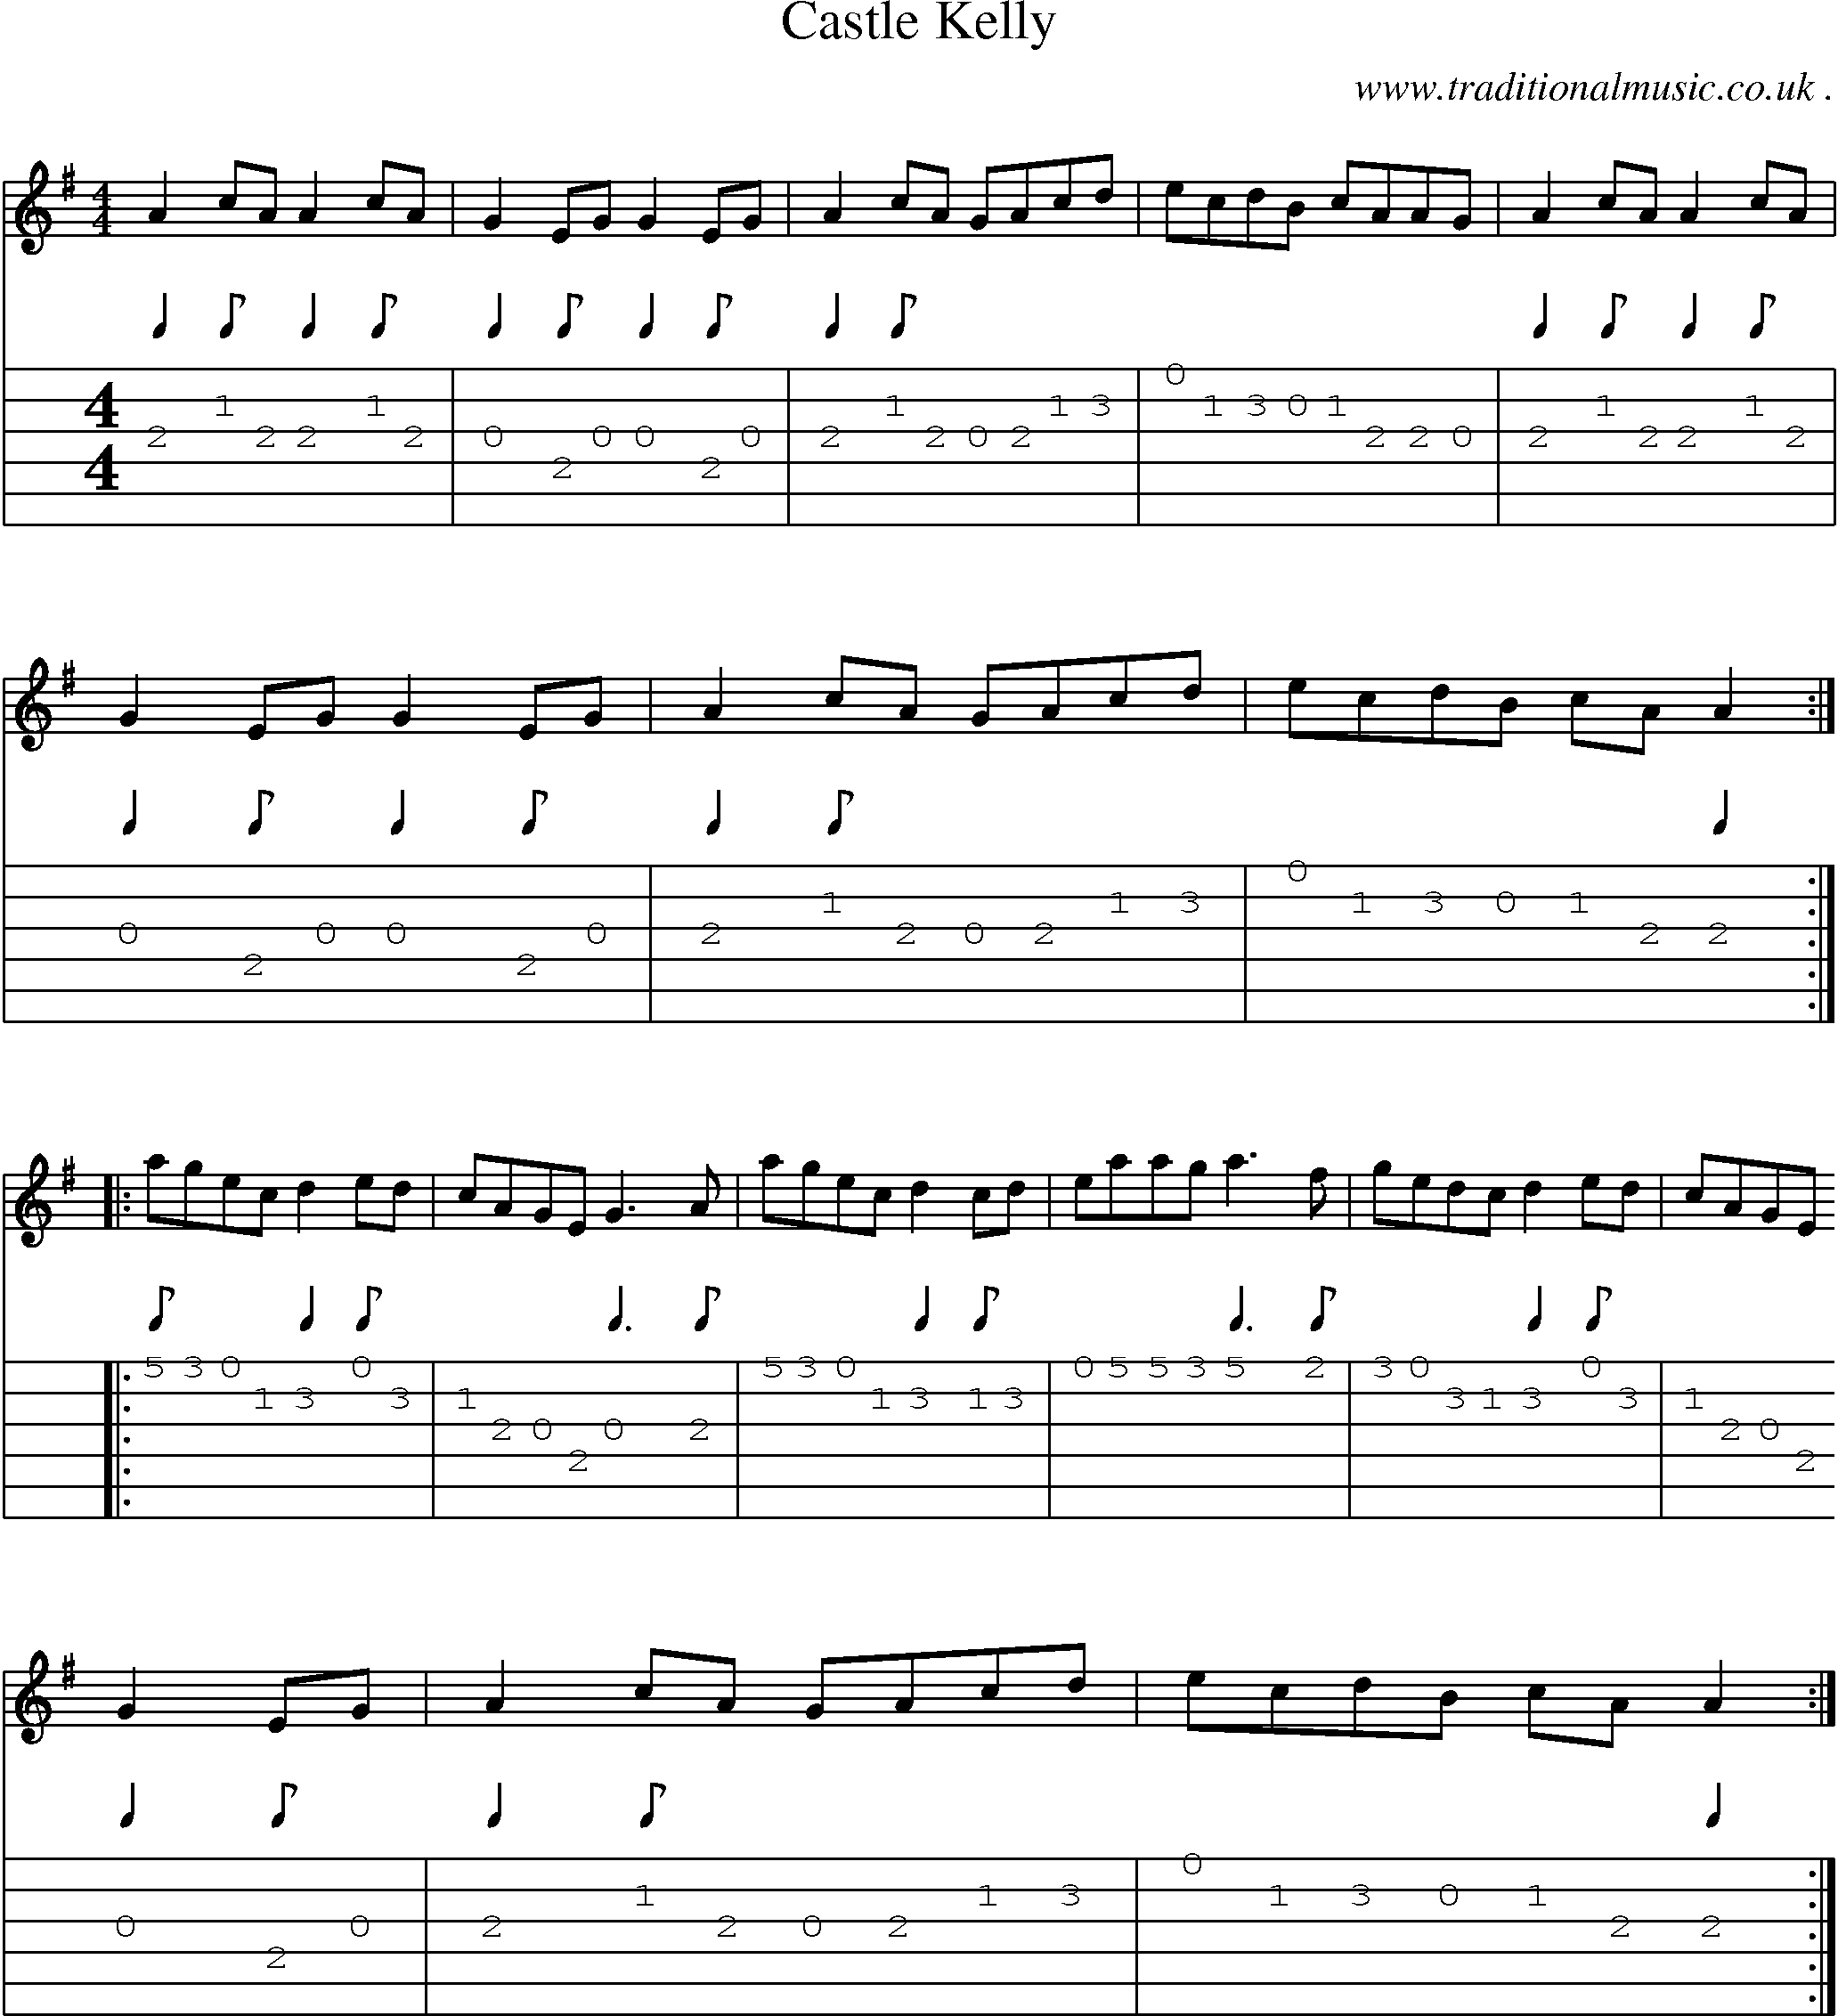 Sheet-Music and Guitar Tabs for Castle Kelly